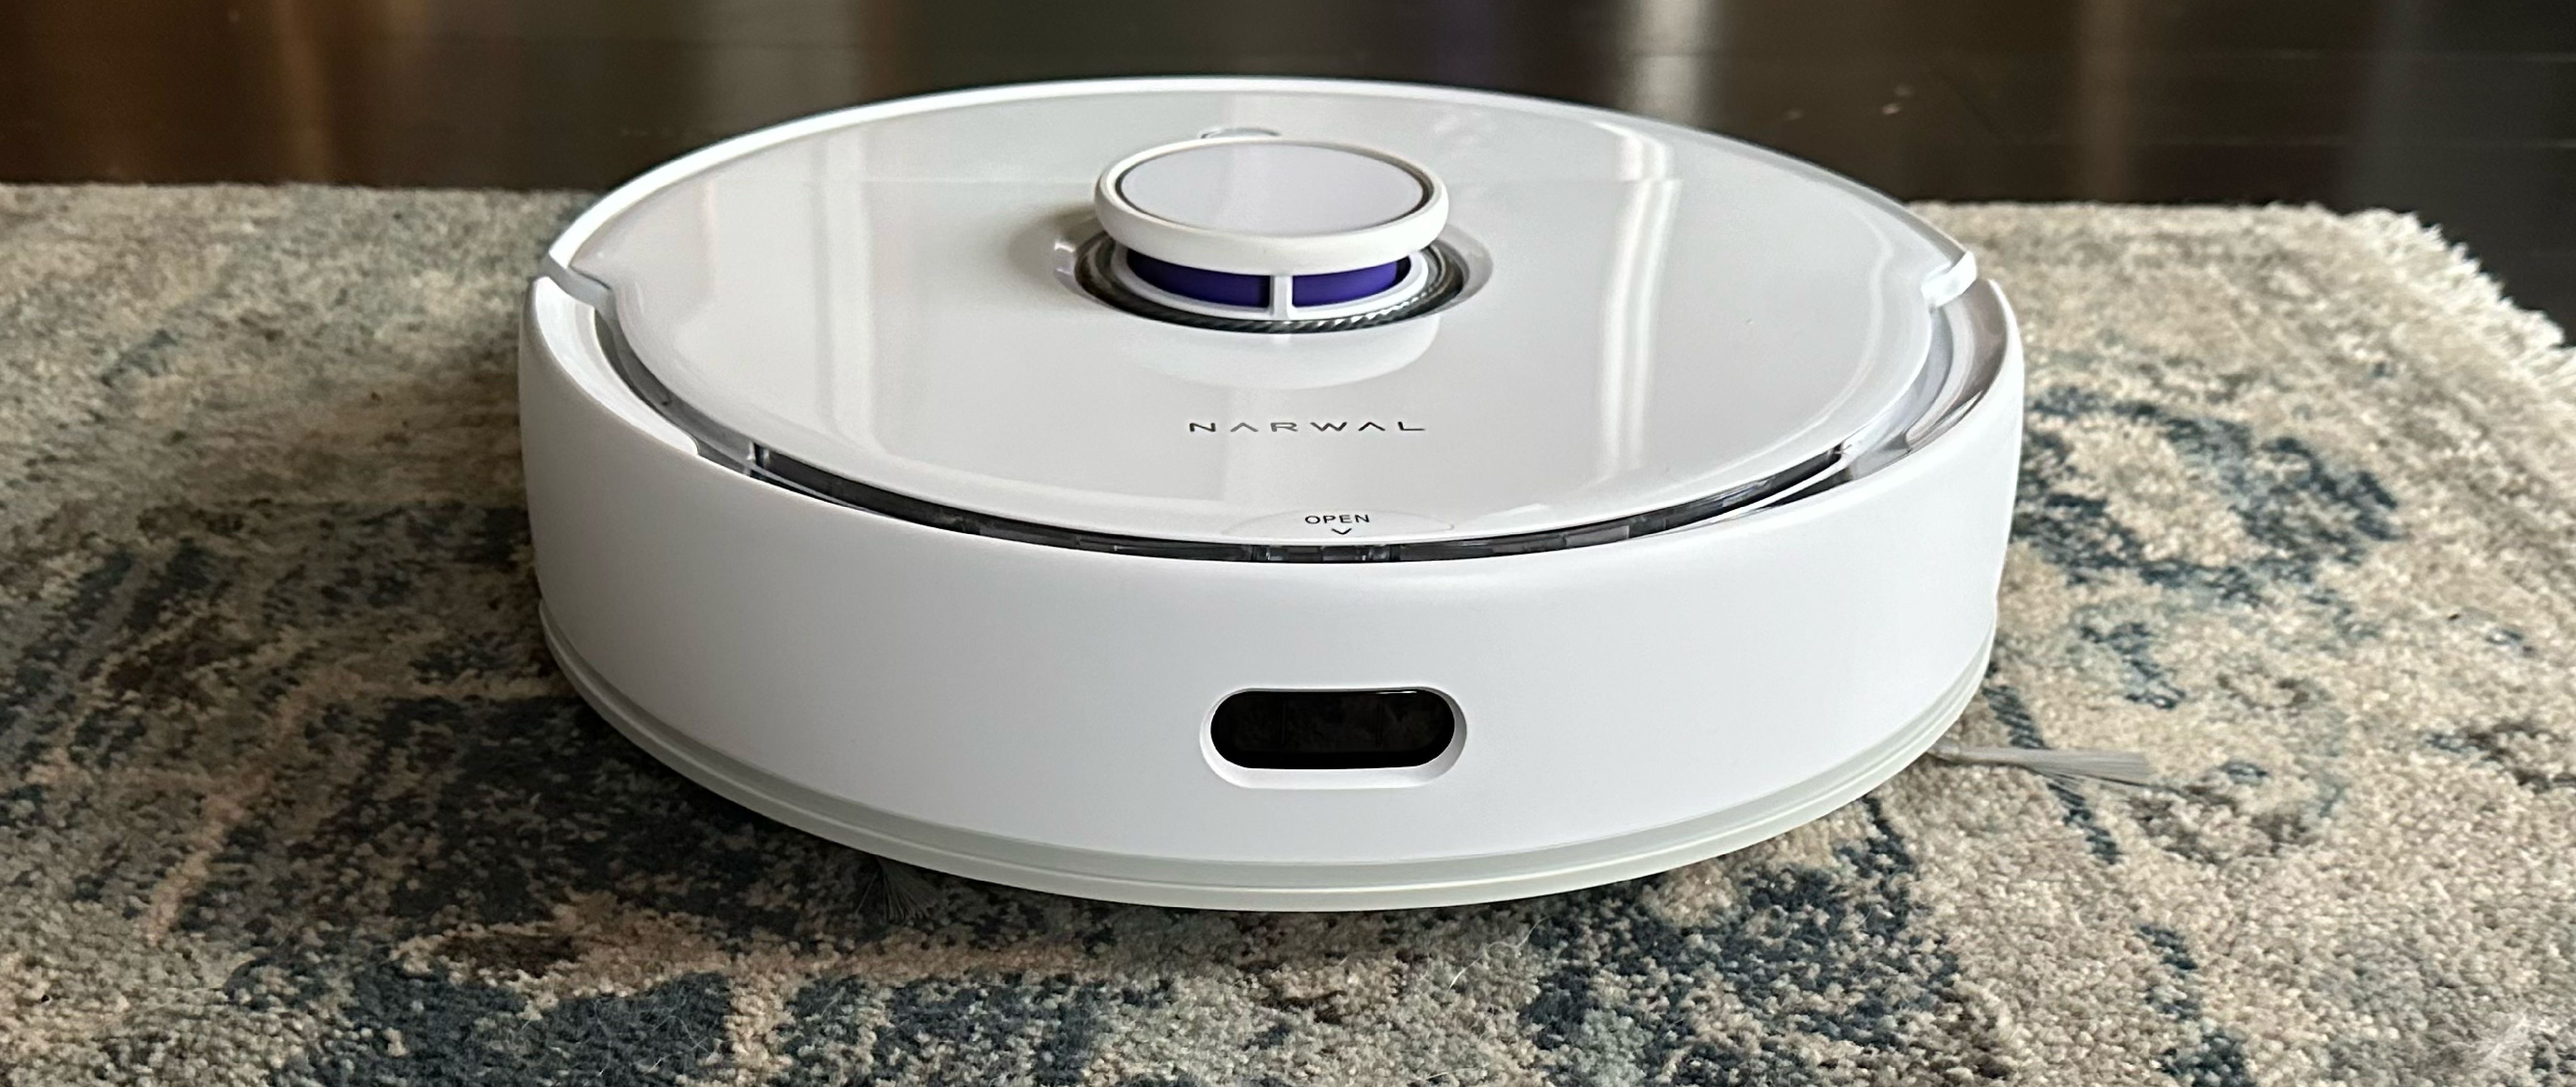 The Narwal Freo is the next step forward for vacuuming-mopping robots